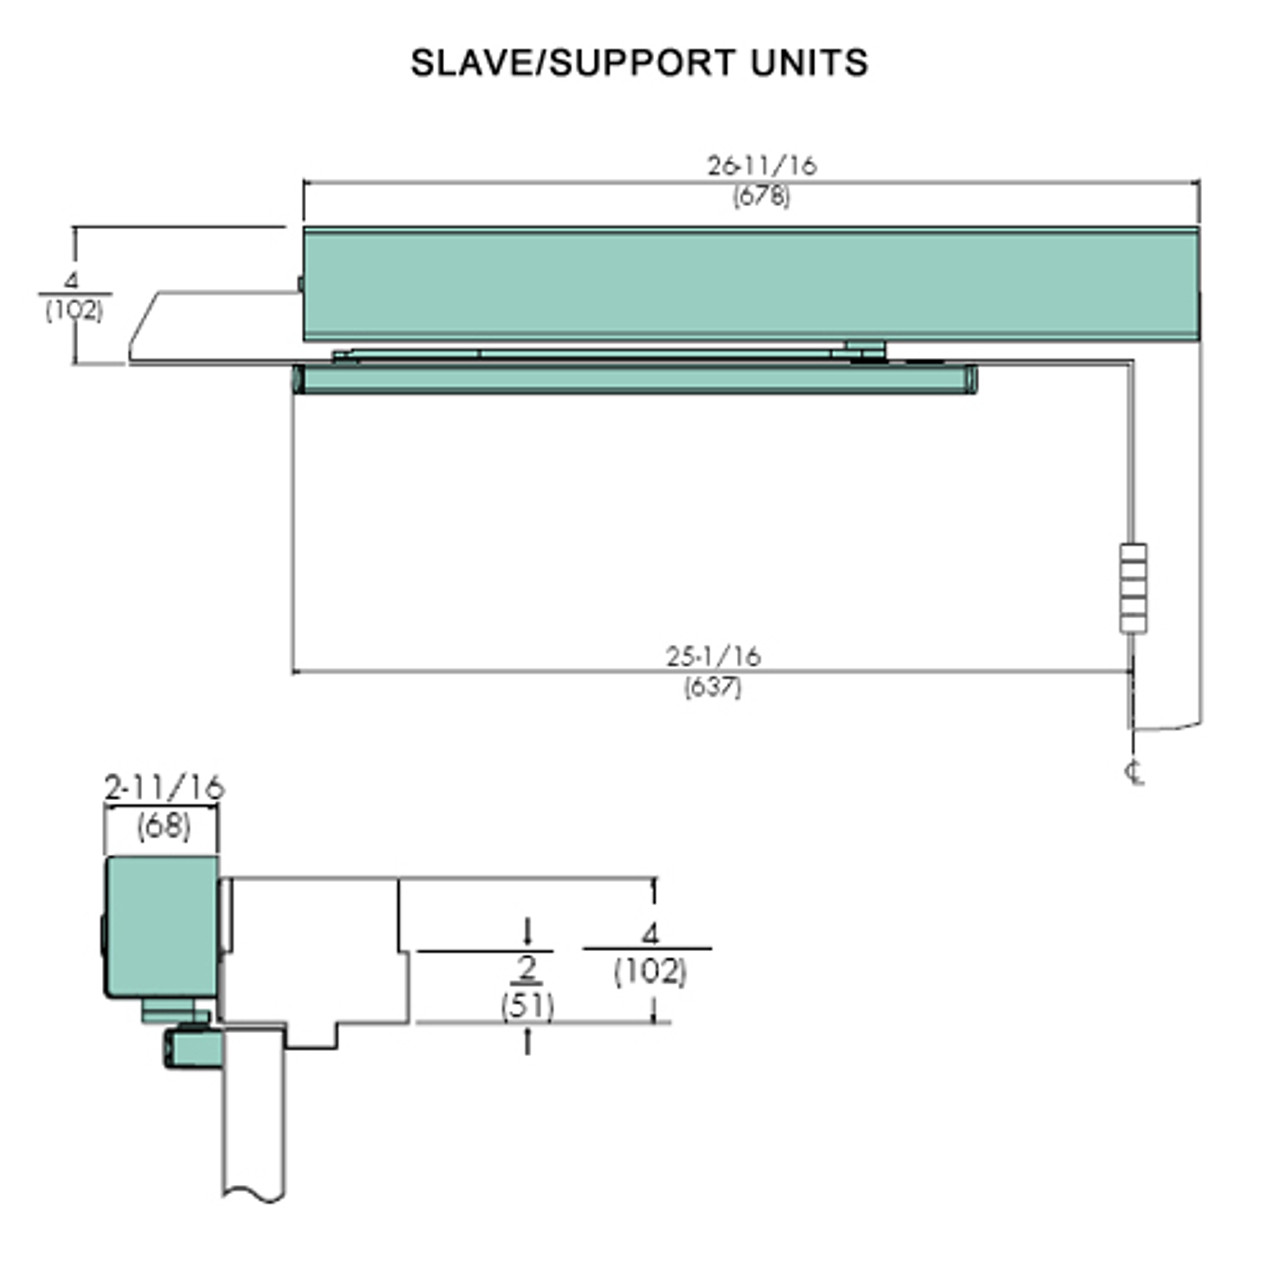 7213MPSO-RH-24VDC-691 Norton 7200 Series Electromechanical Closer and Holder with Rigid Arm Slide Track Slave/Support Unit in Dull Bronze Finish